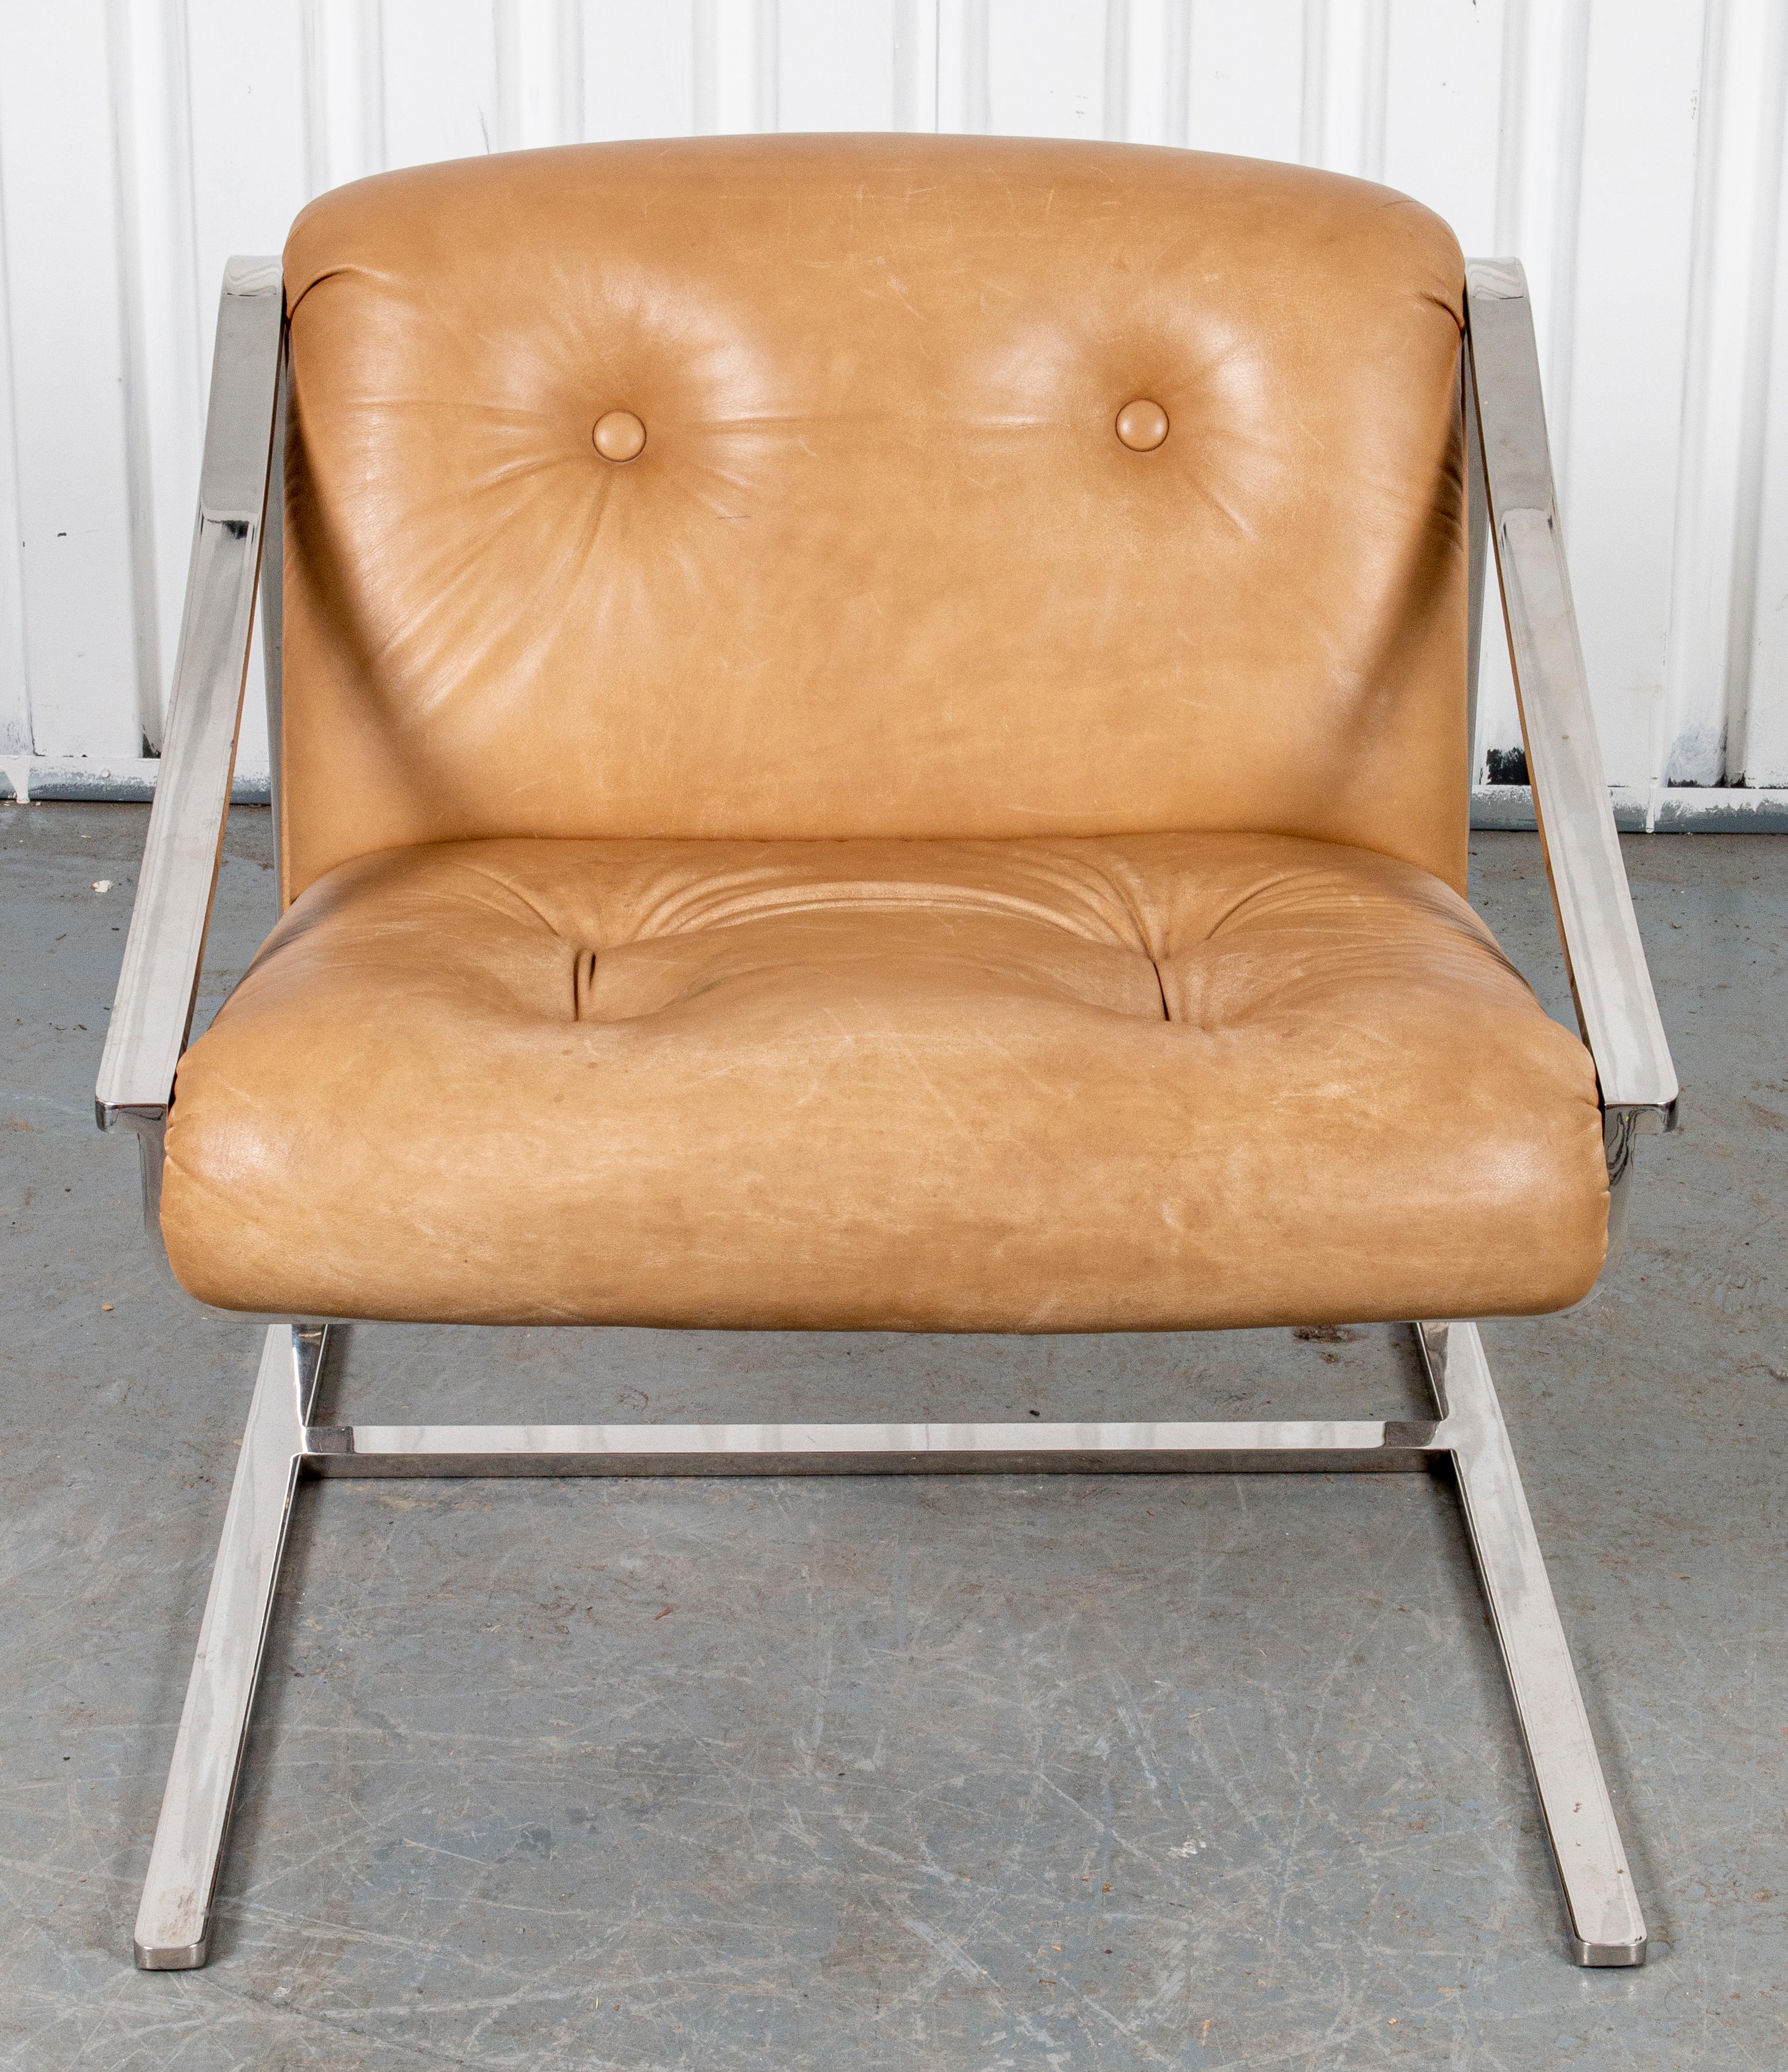 Charles Gibilterra for Brueton Modern leather and chrome cantilever armchair or lounge chair, makers label on bottom. Measures: 29